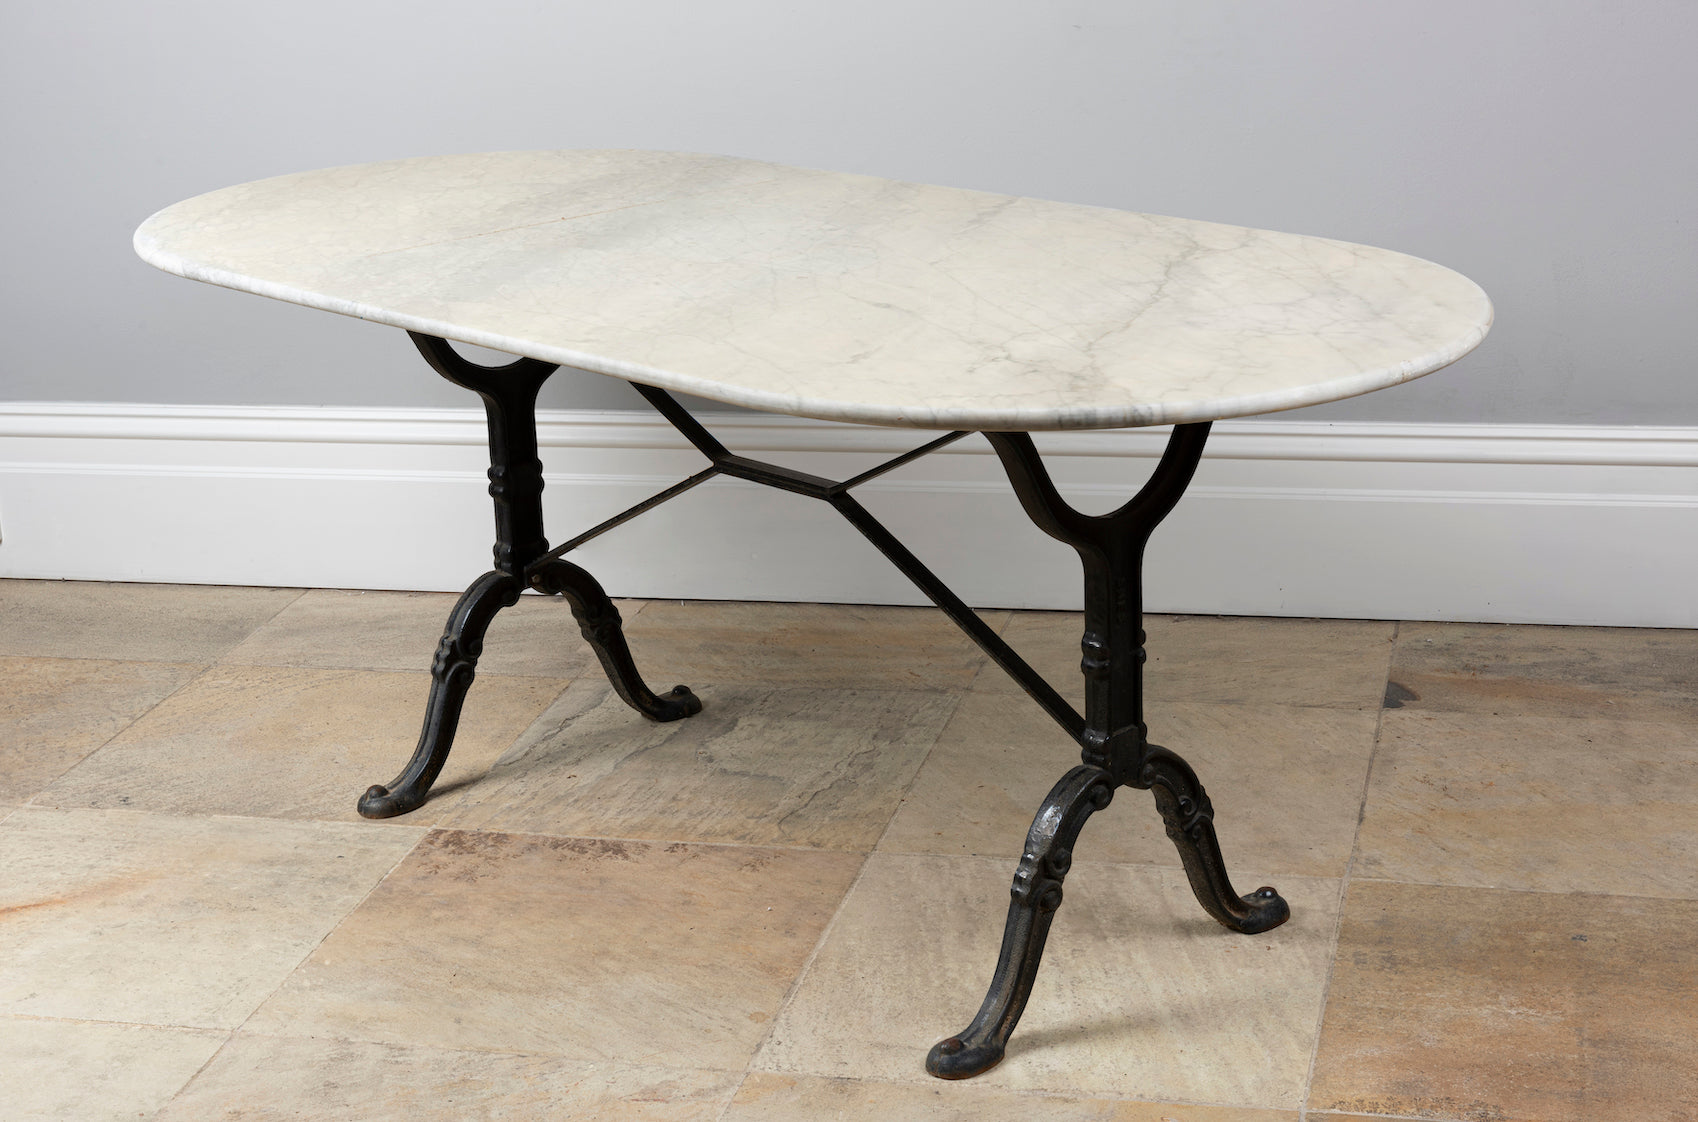 SOLD An impressive black painted cast iron table with large Carrara marble oval top, French 19th Century